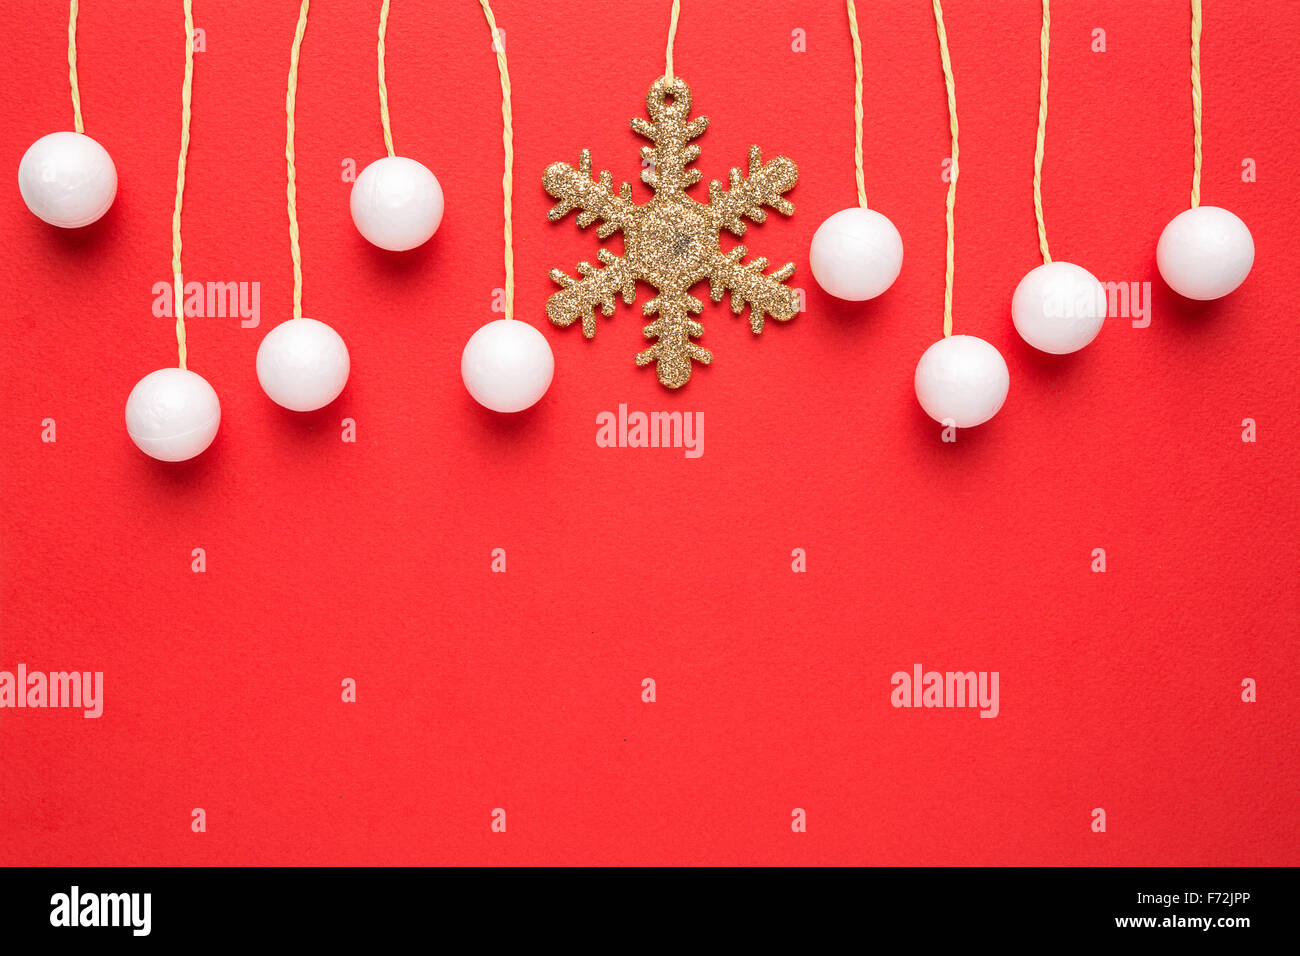 christmas card with hanging decor on red background Stock Photo